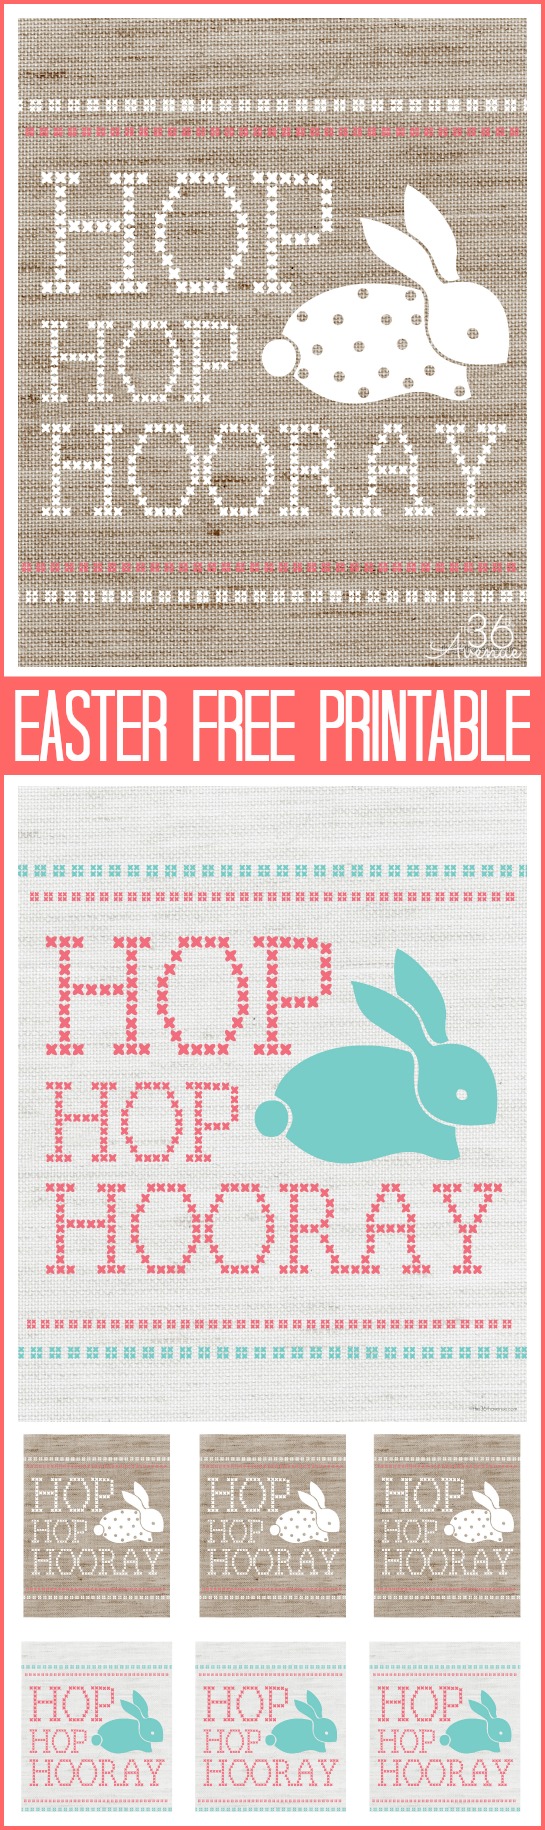 Adorable FREE Easter Printables @the36thavenue #easter #printable